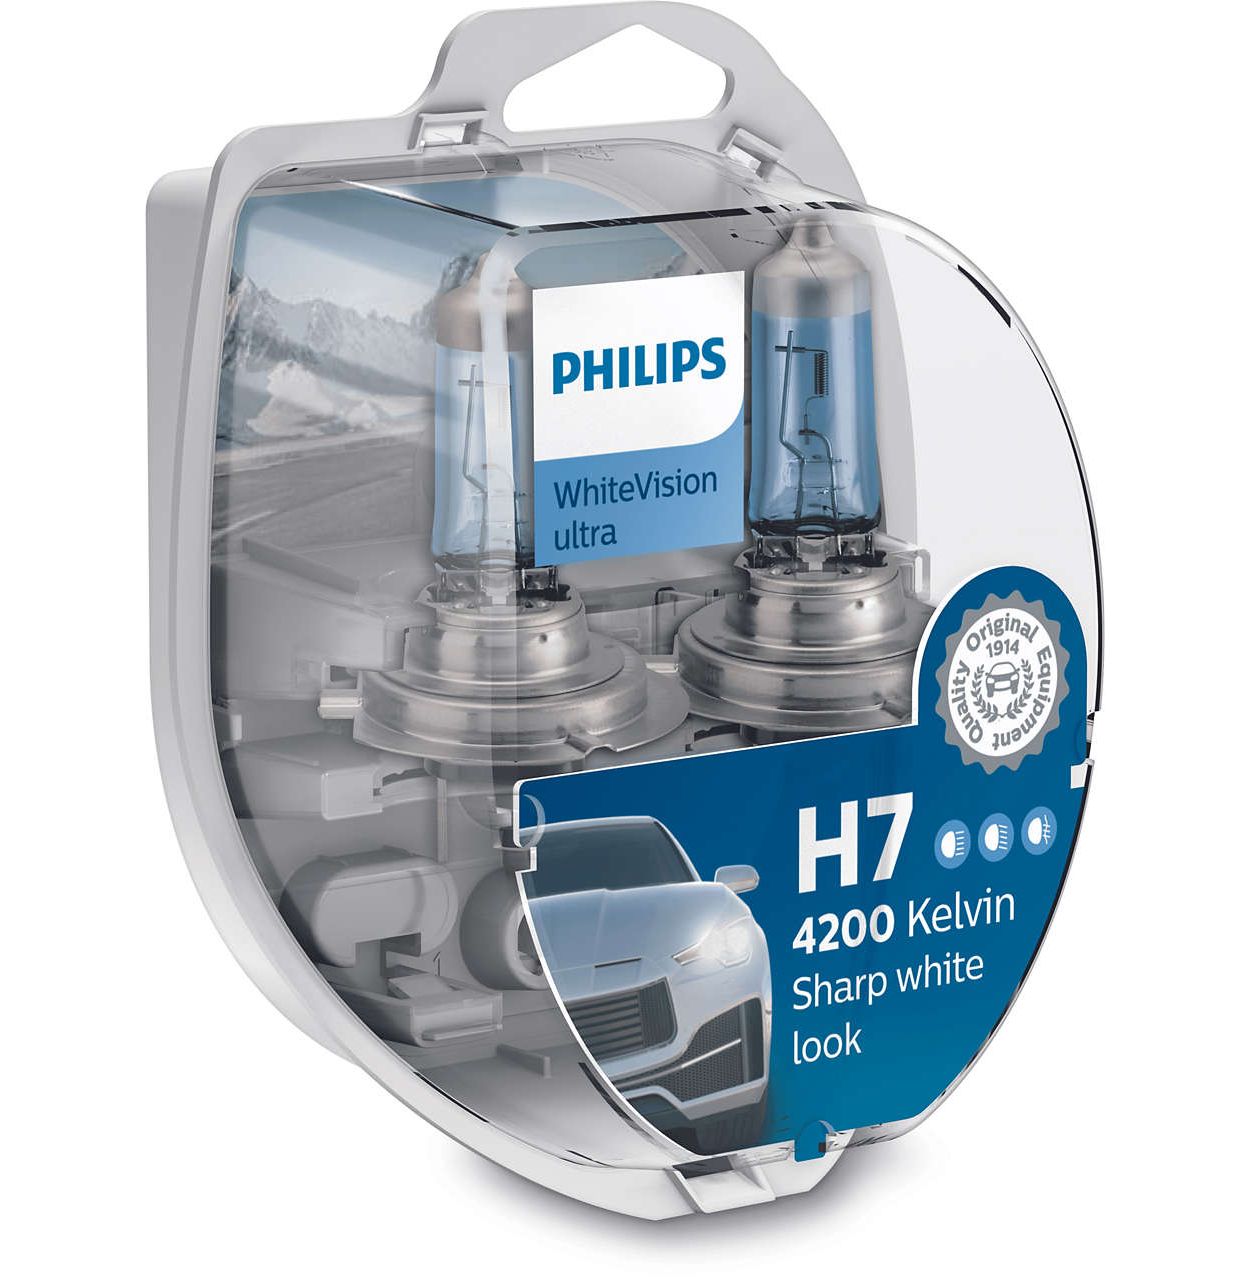 https://images.philips.com/is/image/philipsconsumer/bf10bf11a3be4aac8c5fafa800f241ff?$jpglarge$&wid=1250